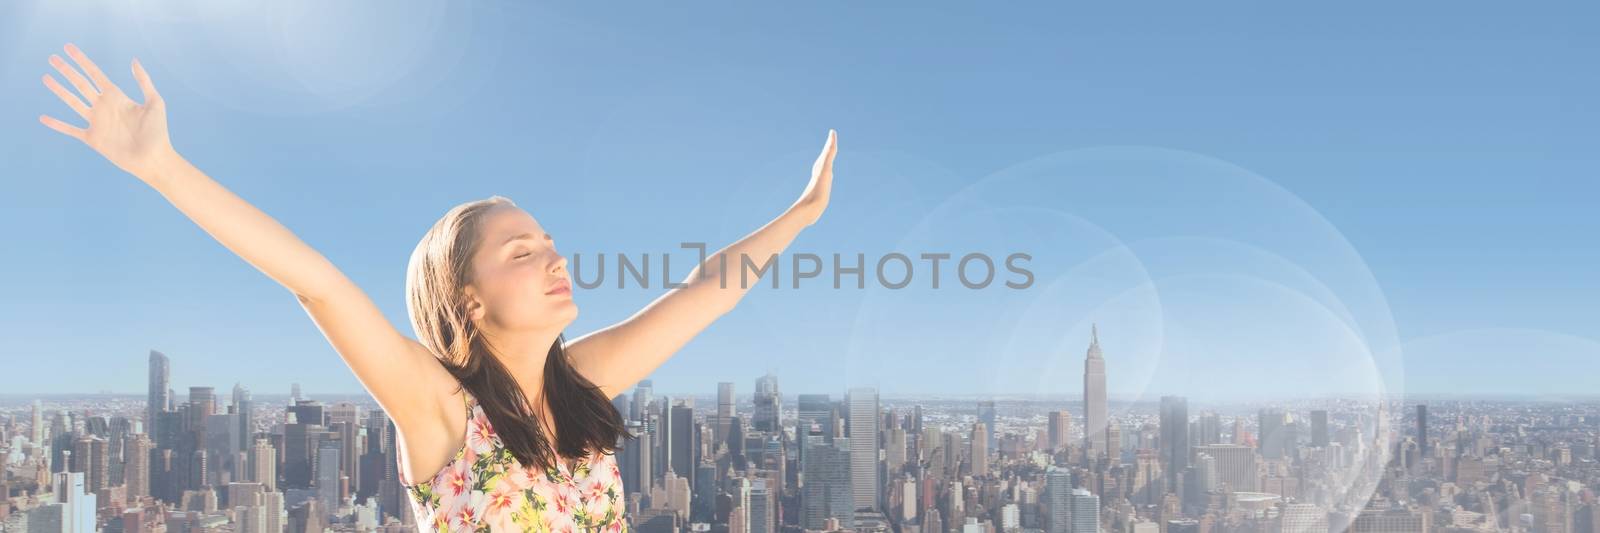 Millennial woman with arms out against skyline and Summer sky with flare by Wavebreakmedia